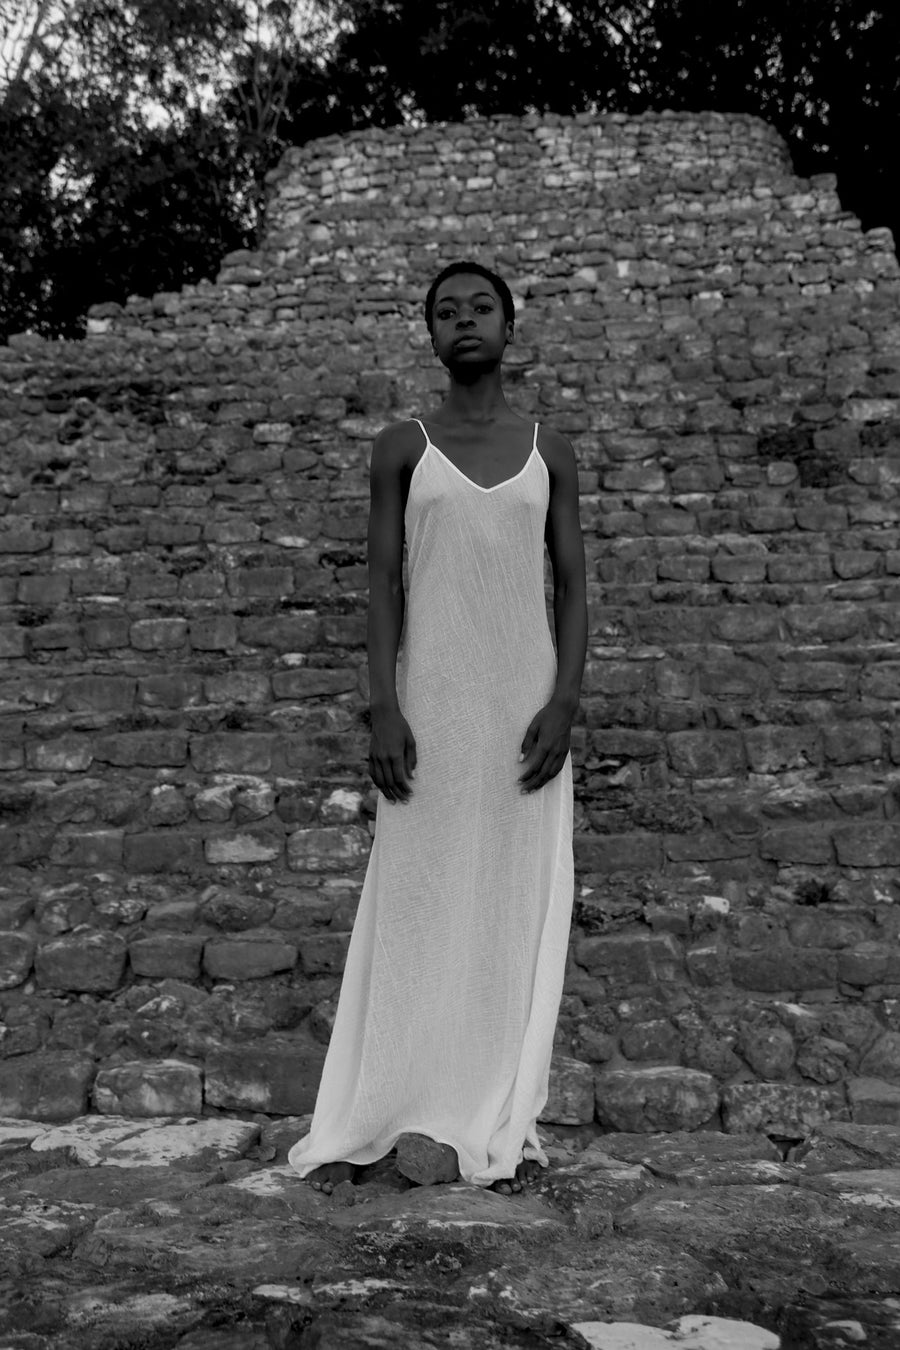 This is a black and white photo of a womand in a white slip dress syanding in front of a monument made of stones.